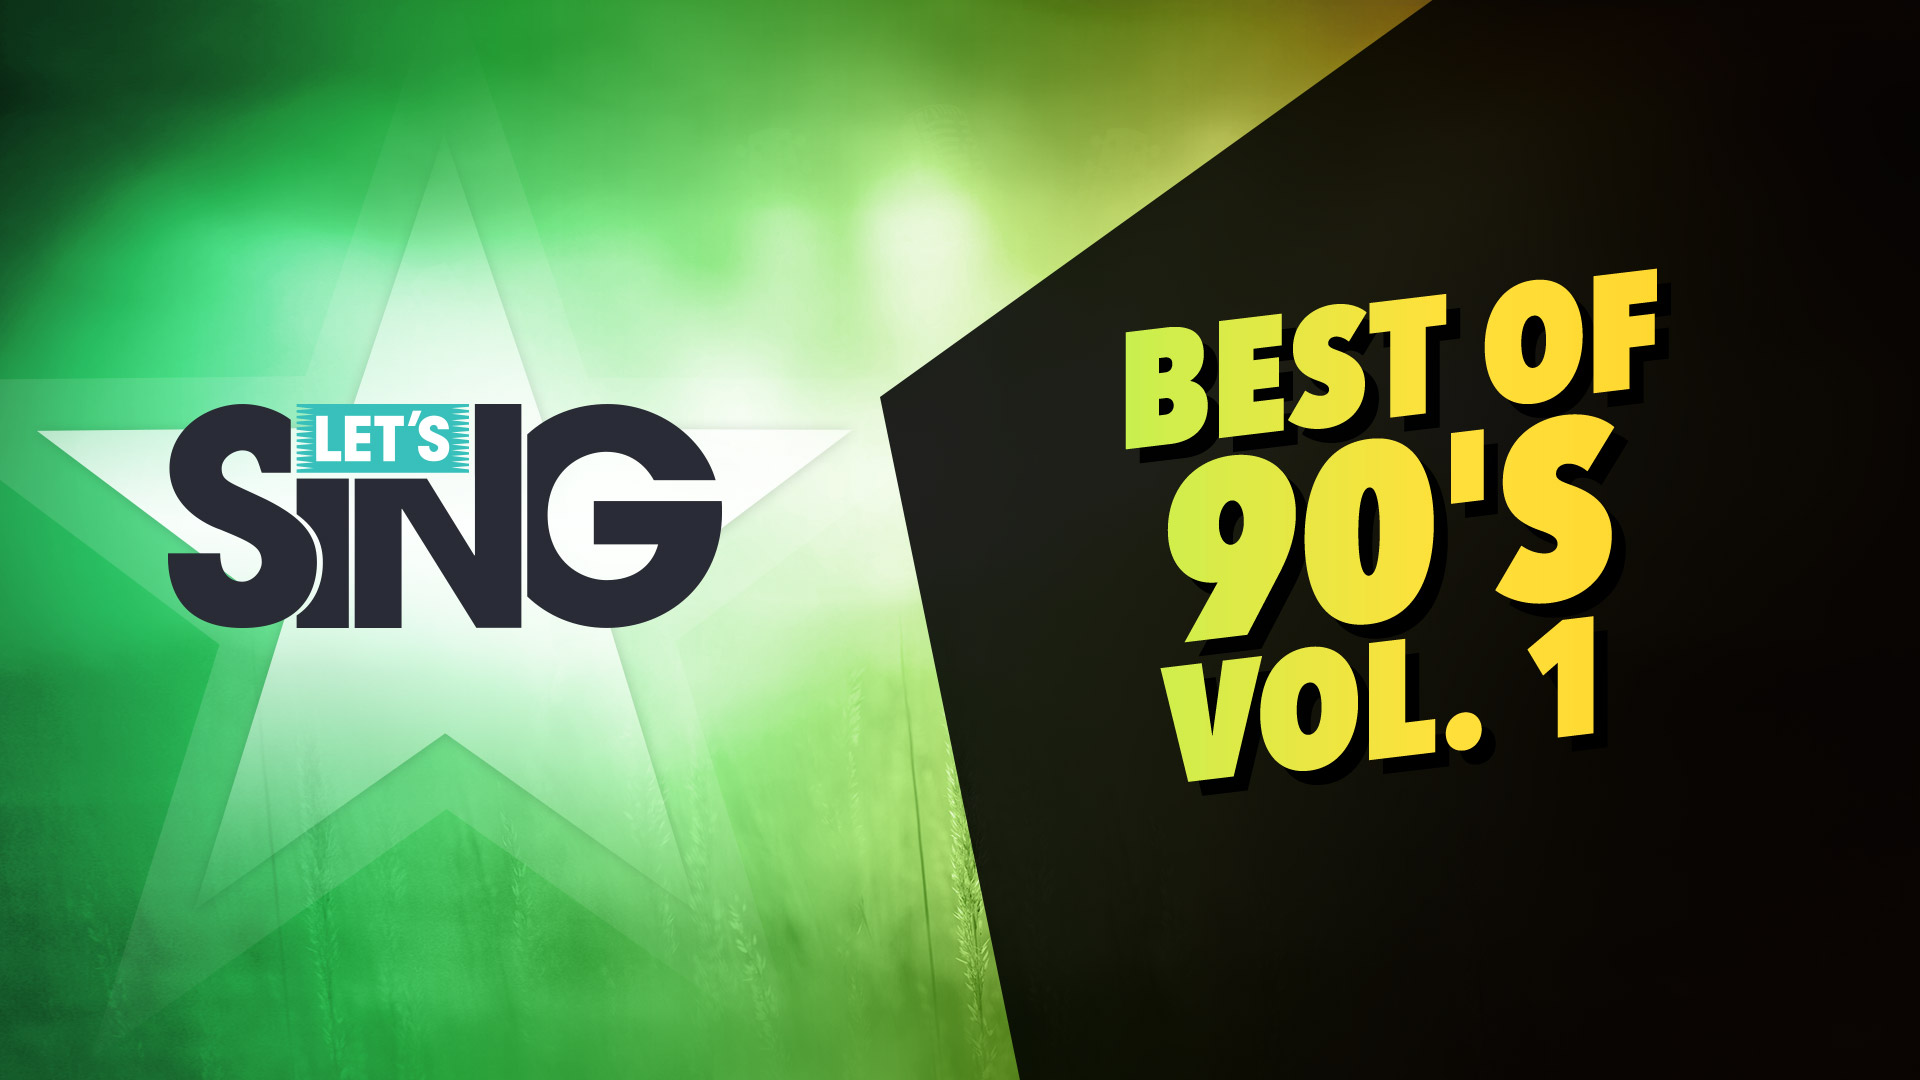 Let's Sing - Best of 90's Vol. 1 Song Pack